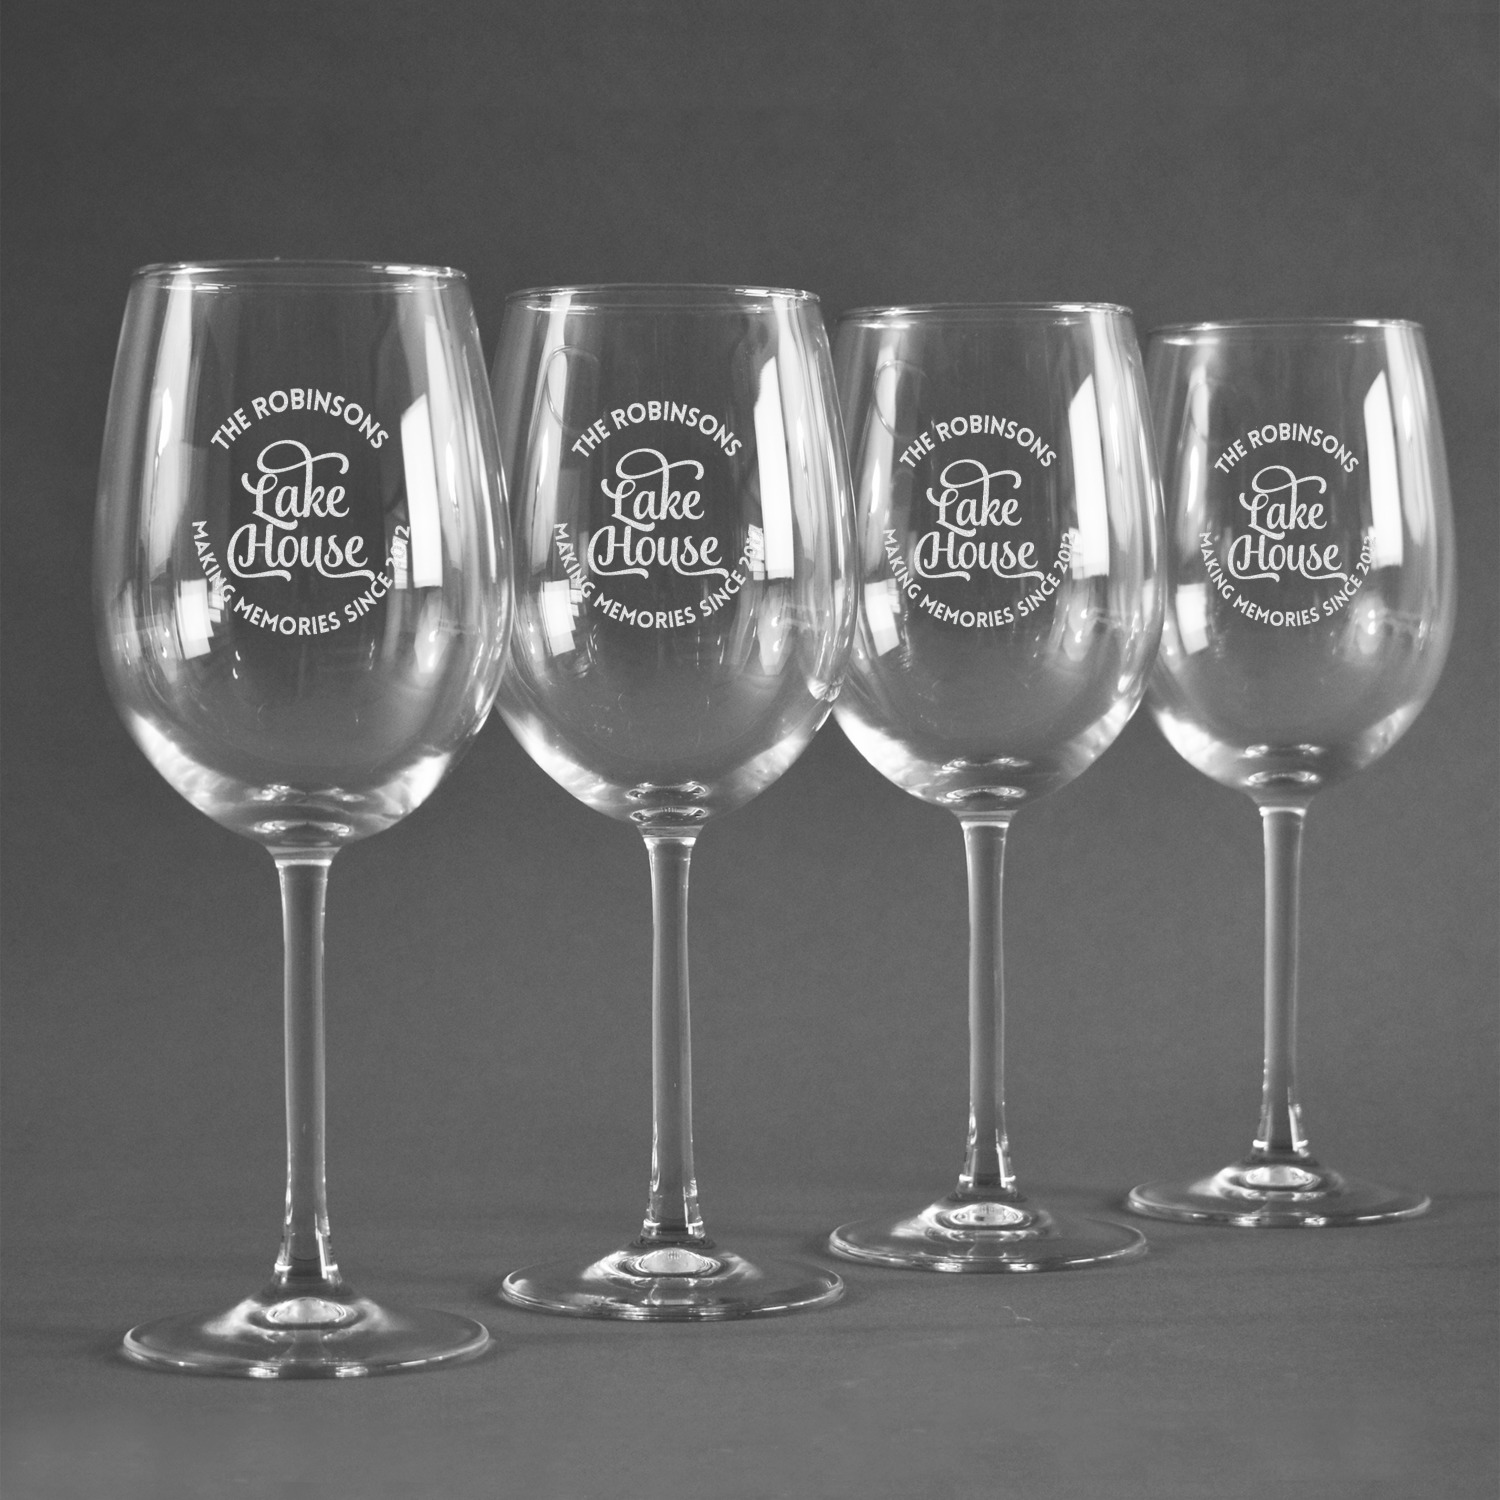 https://www.youcustomizeit.com/common/MAKE/1018278/Lake-House-2-Personalized-Wine-Glasses-Set-of-4.jpg?lm=1682545356